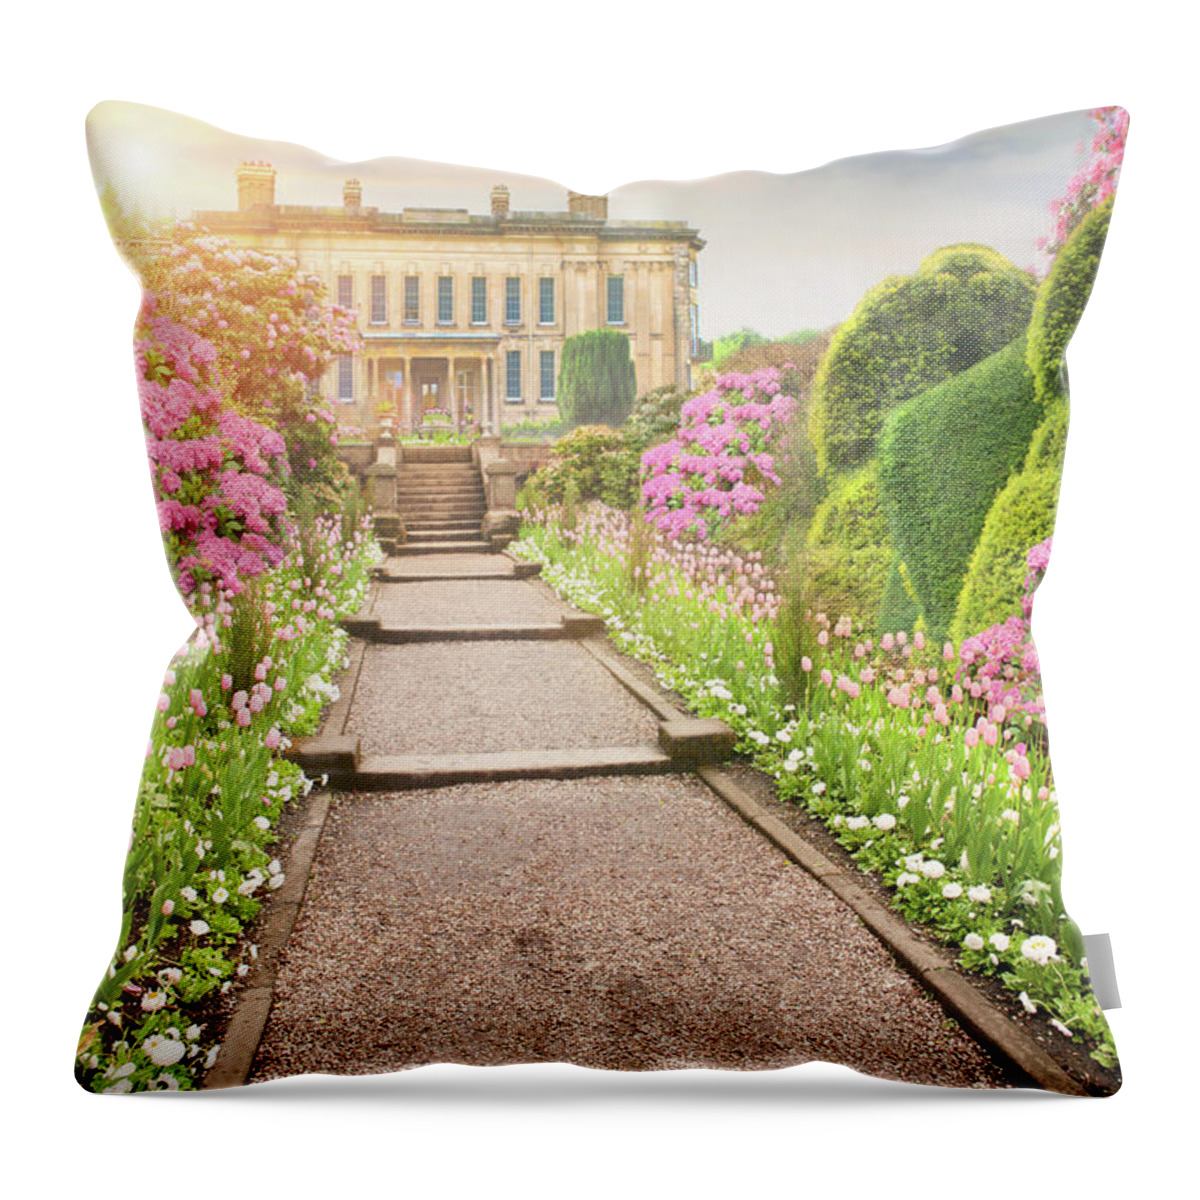 Mansion Throw Pillow featuring the photograph Pathway To The Mansion Through Tulips At Sunset by Lee Avison